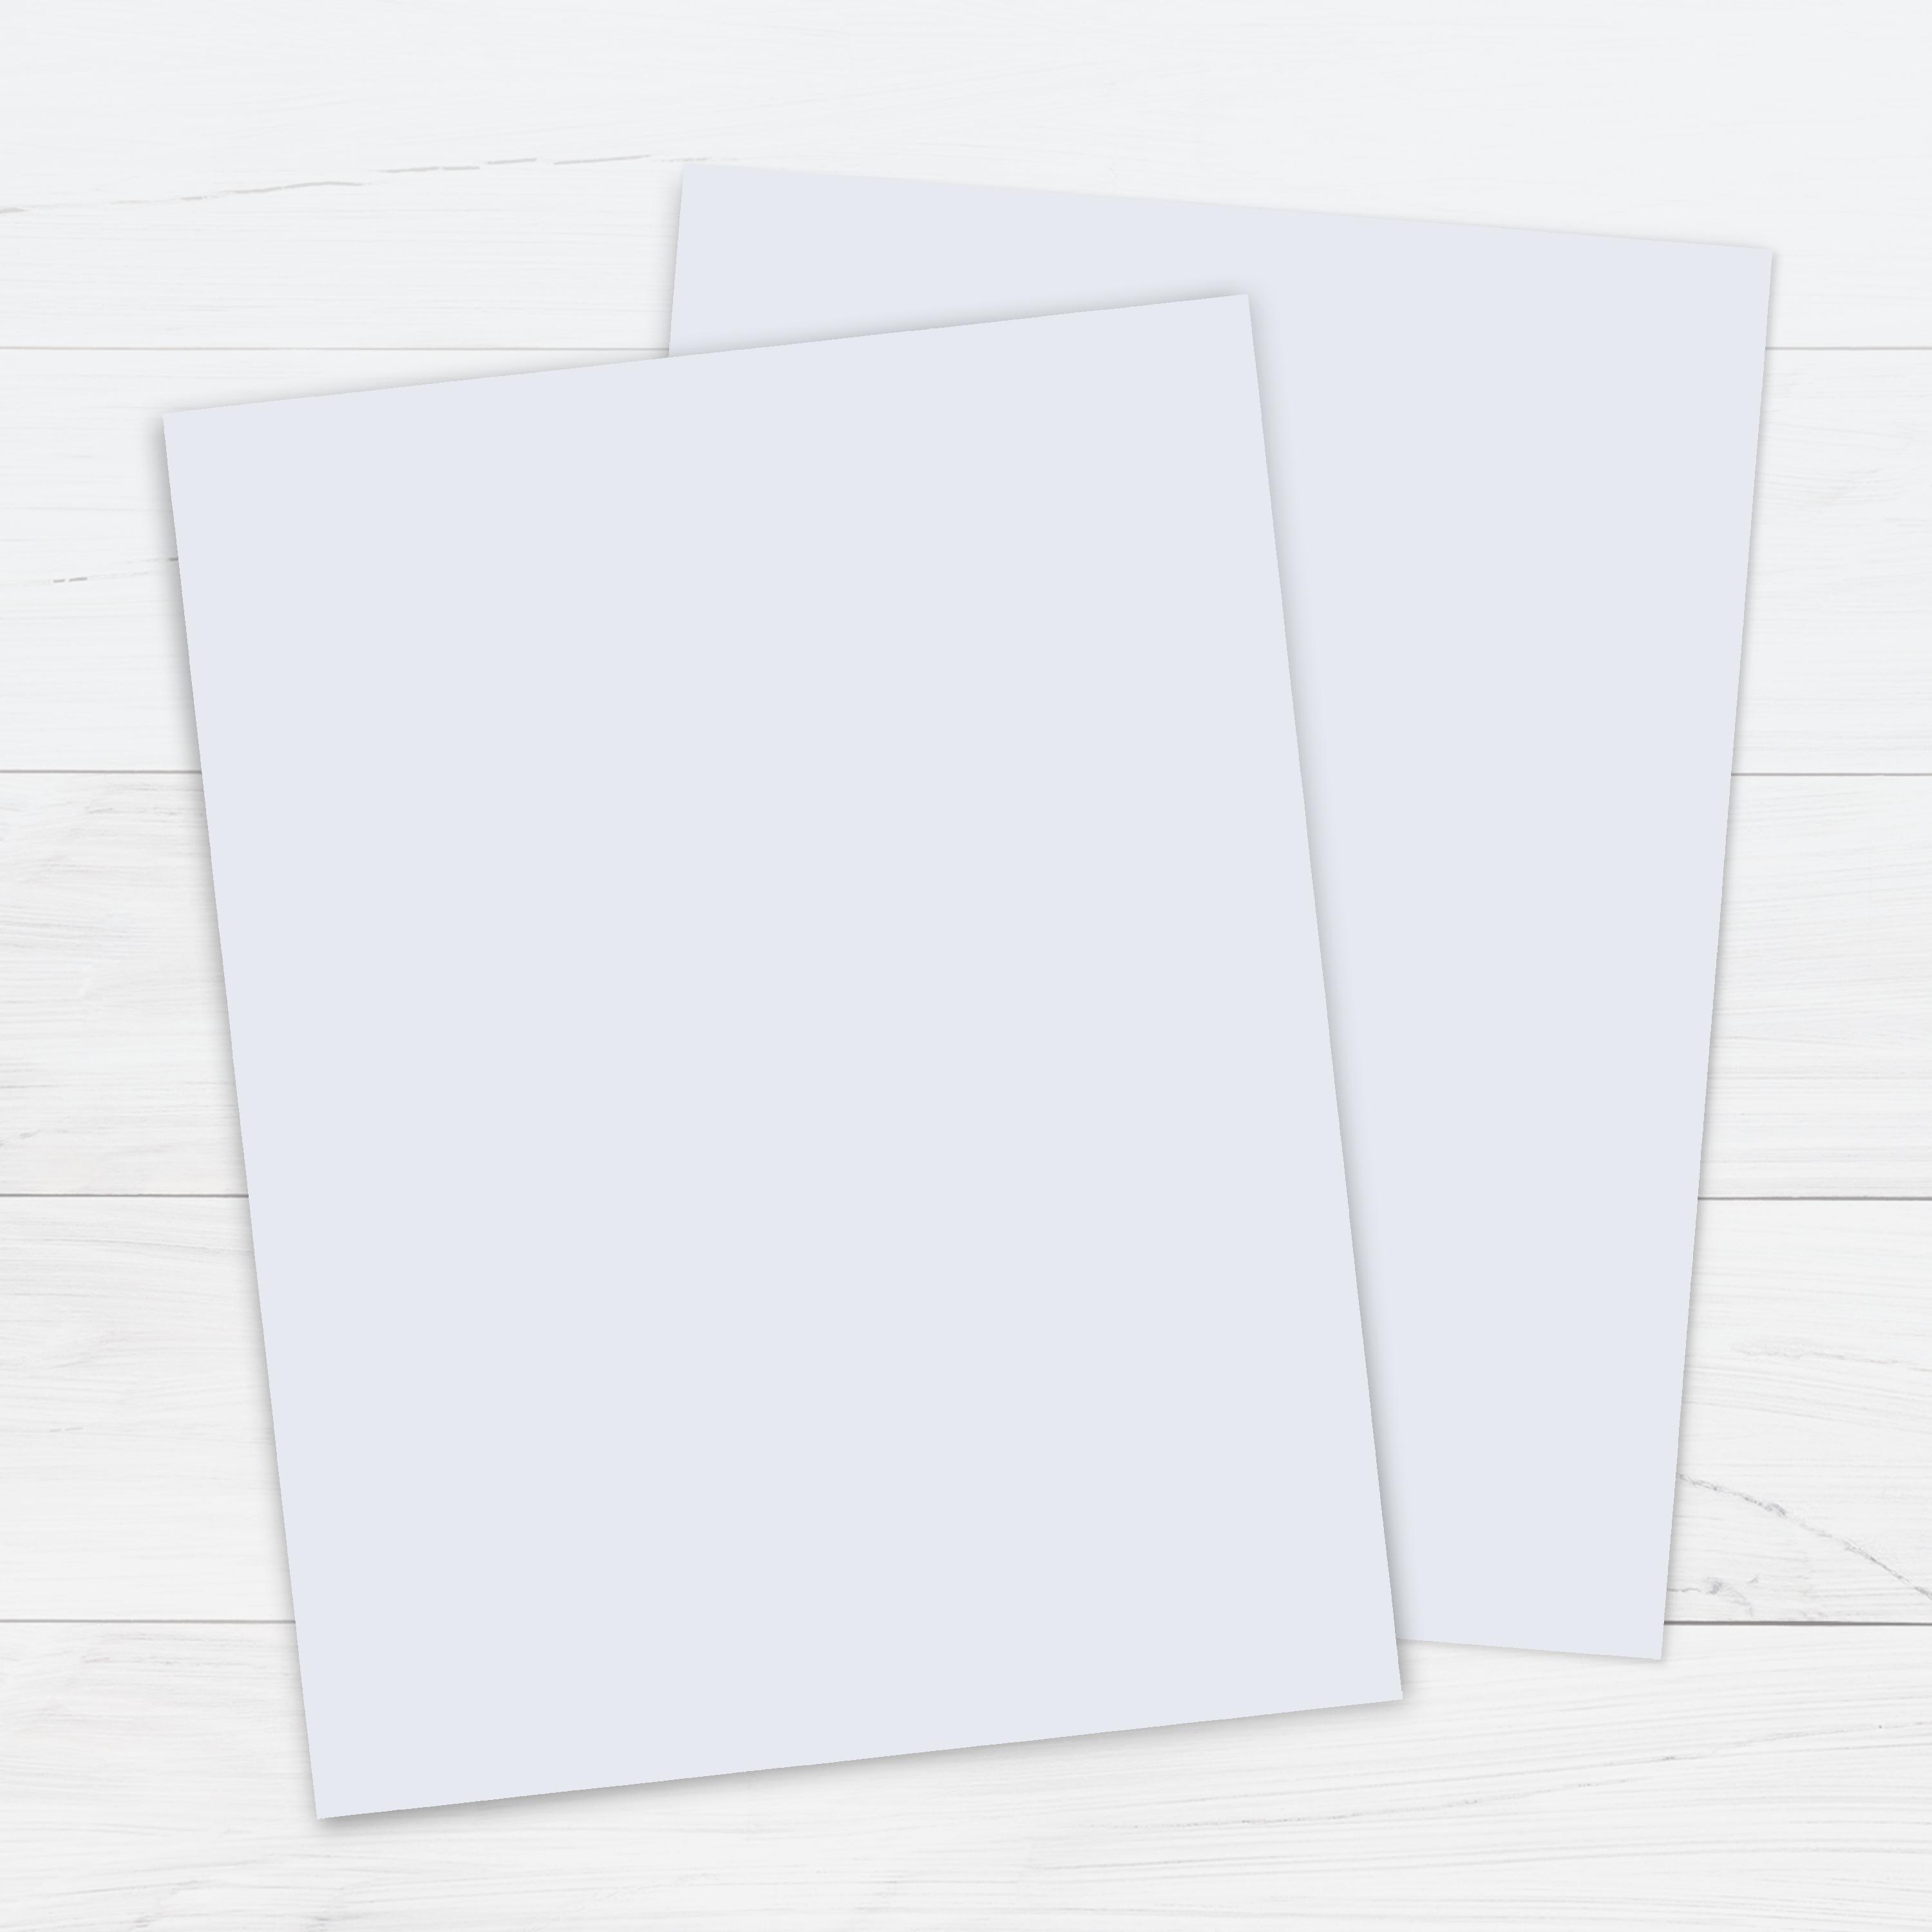 Printworks Elementree Sustainable Printer Paper - White - 8.5 x 11 in